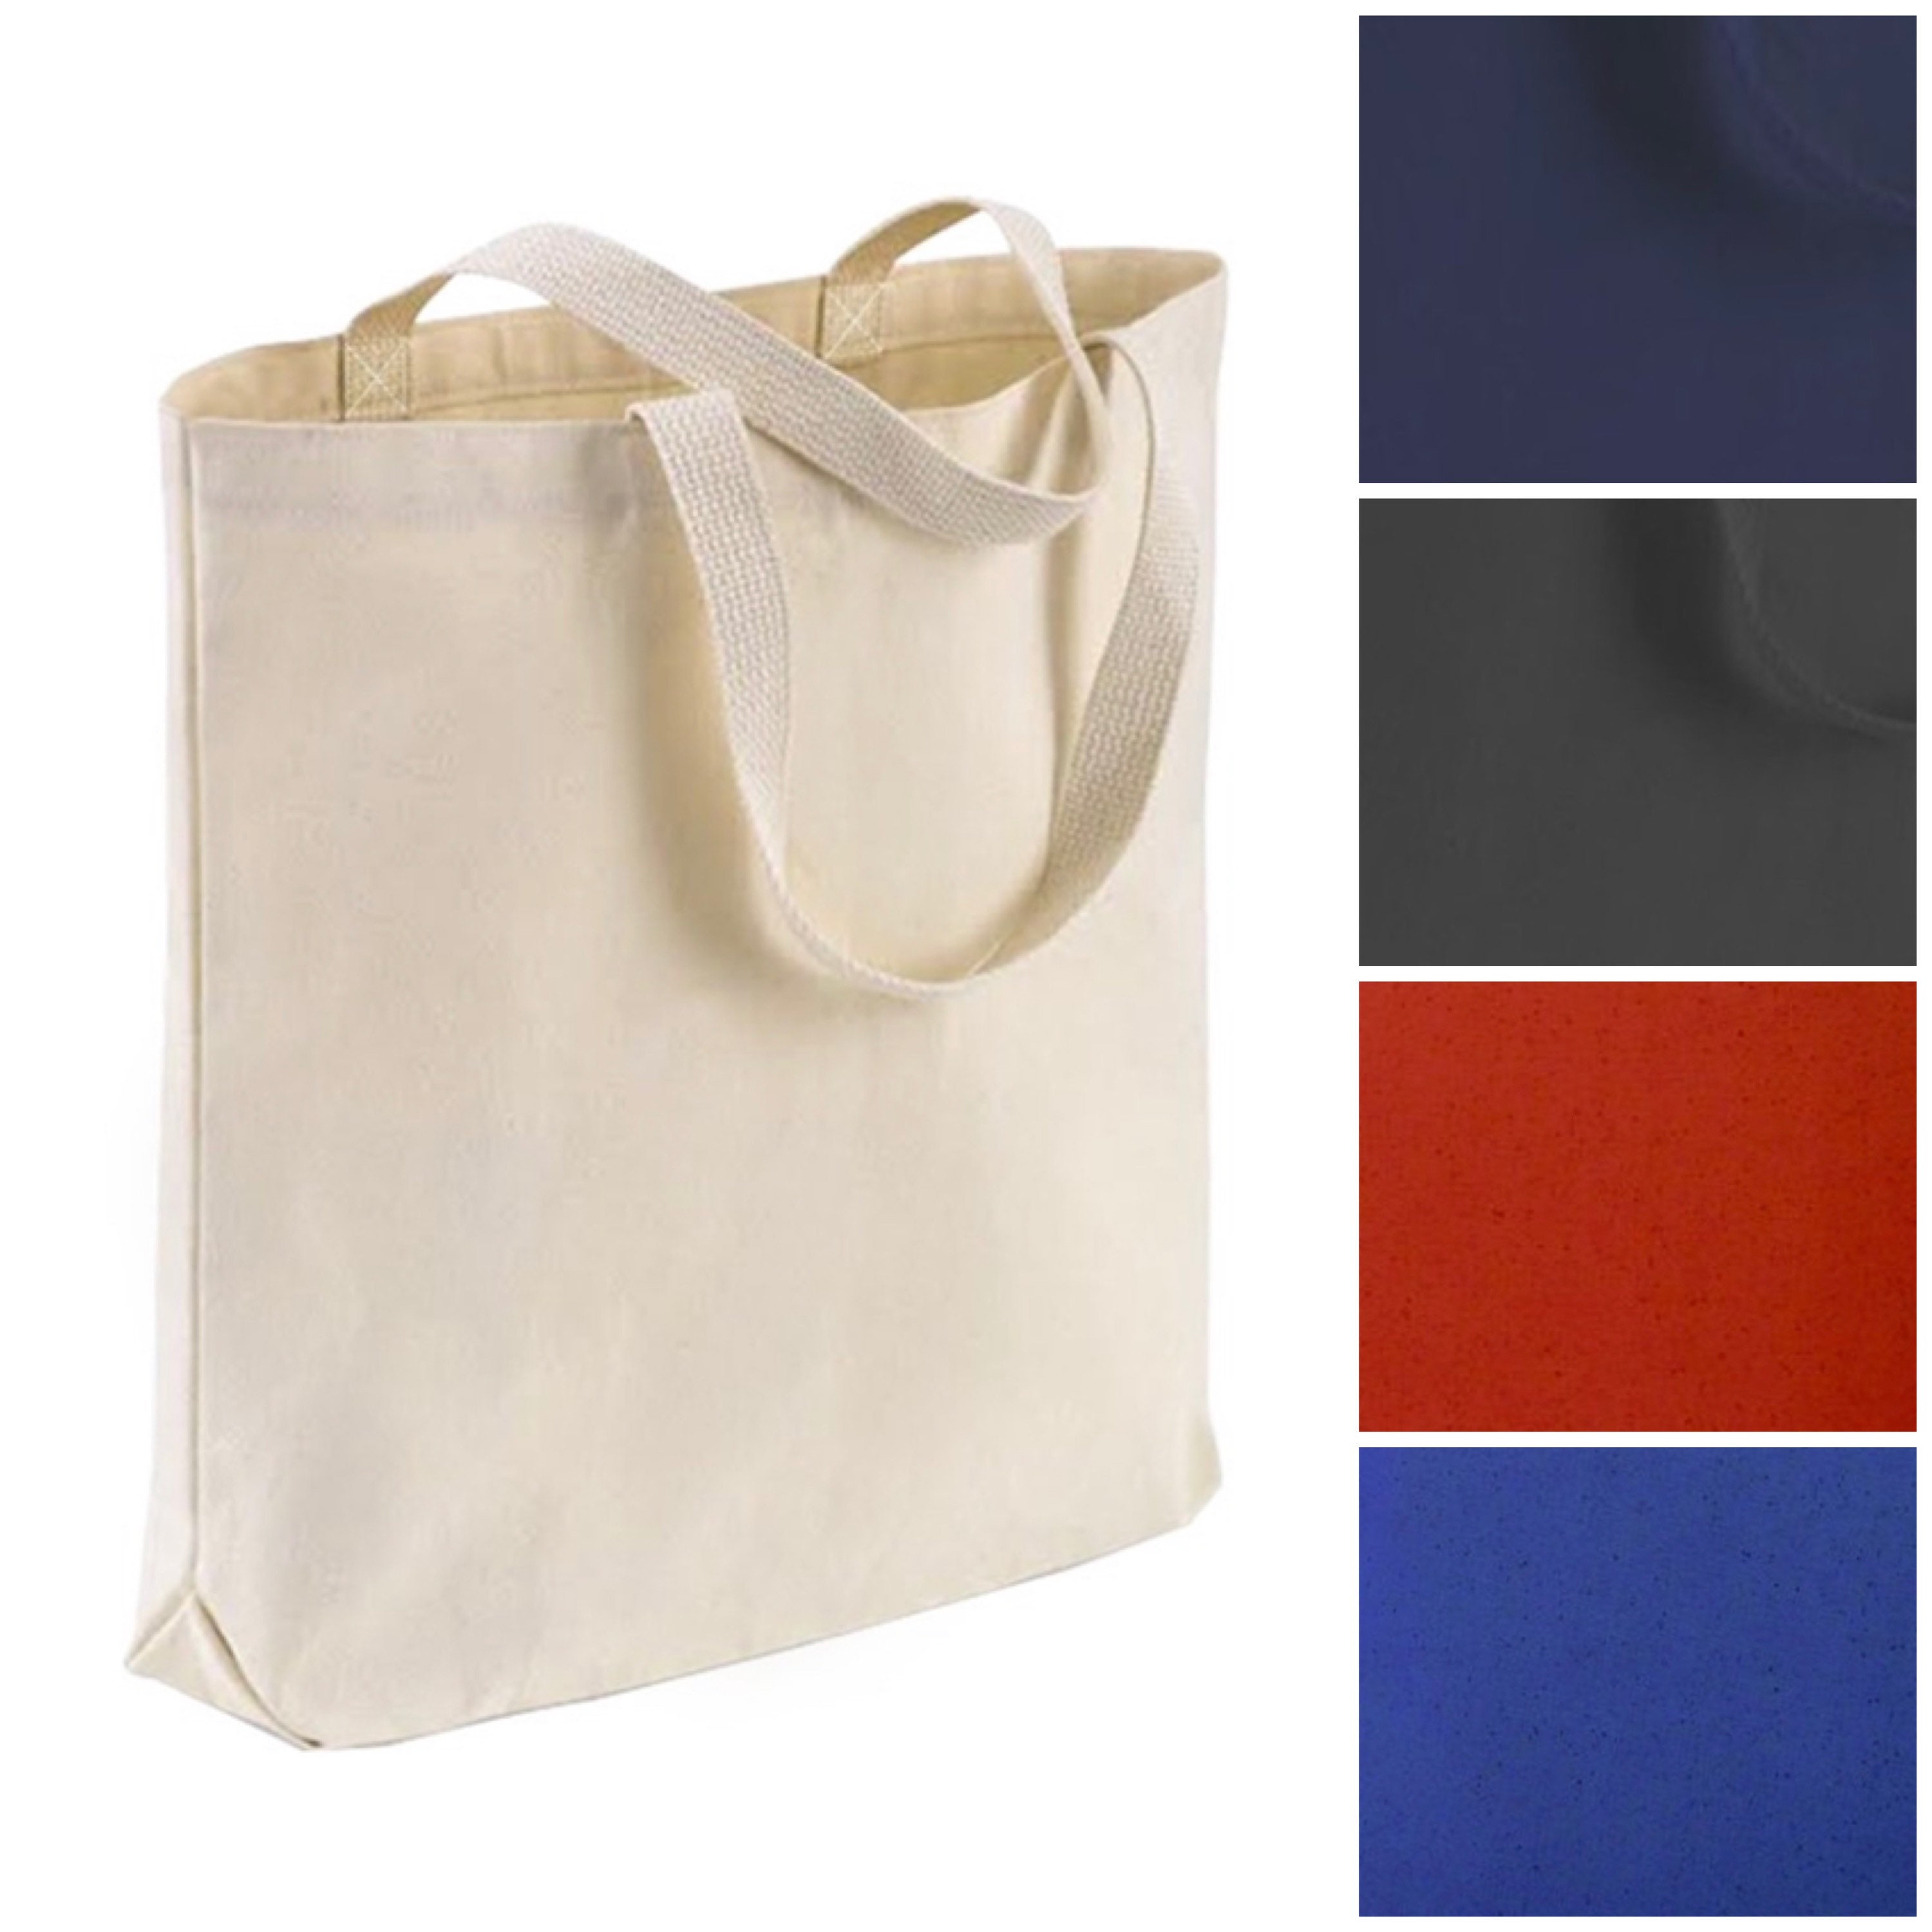 New FACTORY SECONDS Blank Tote Bag Extra Large Heavy Duty Canvas